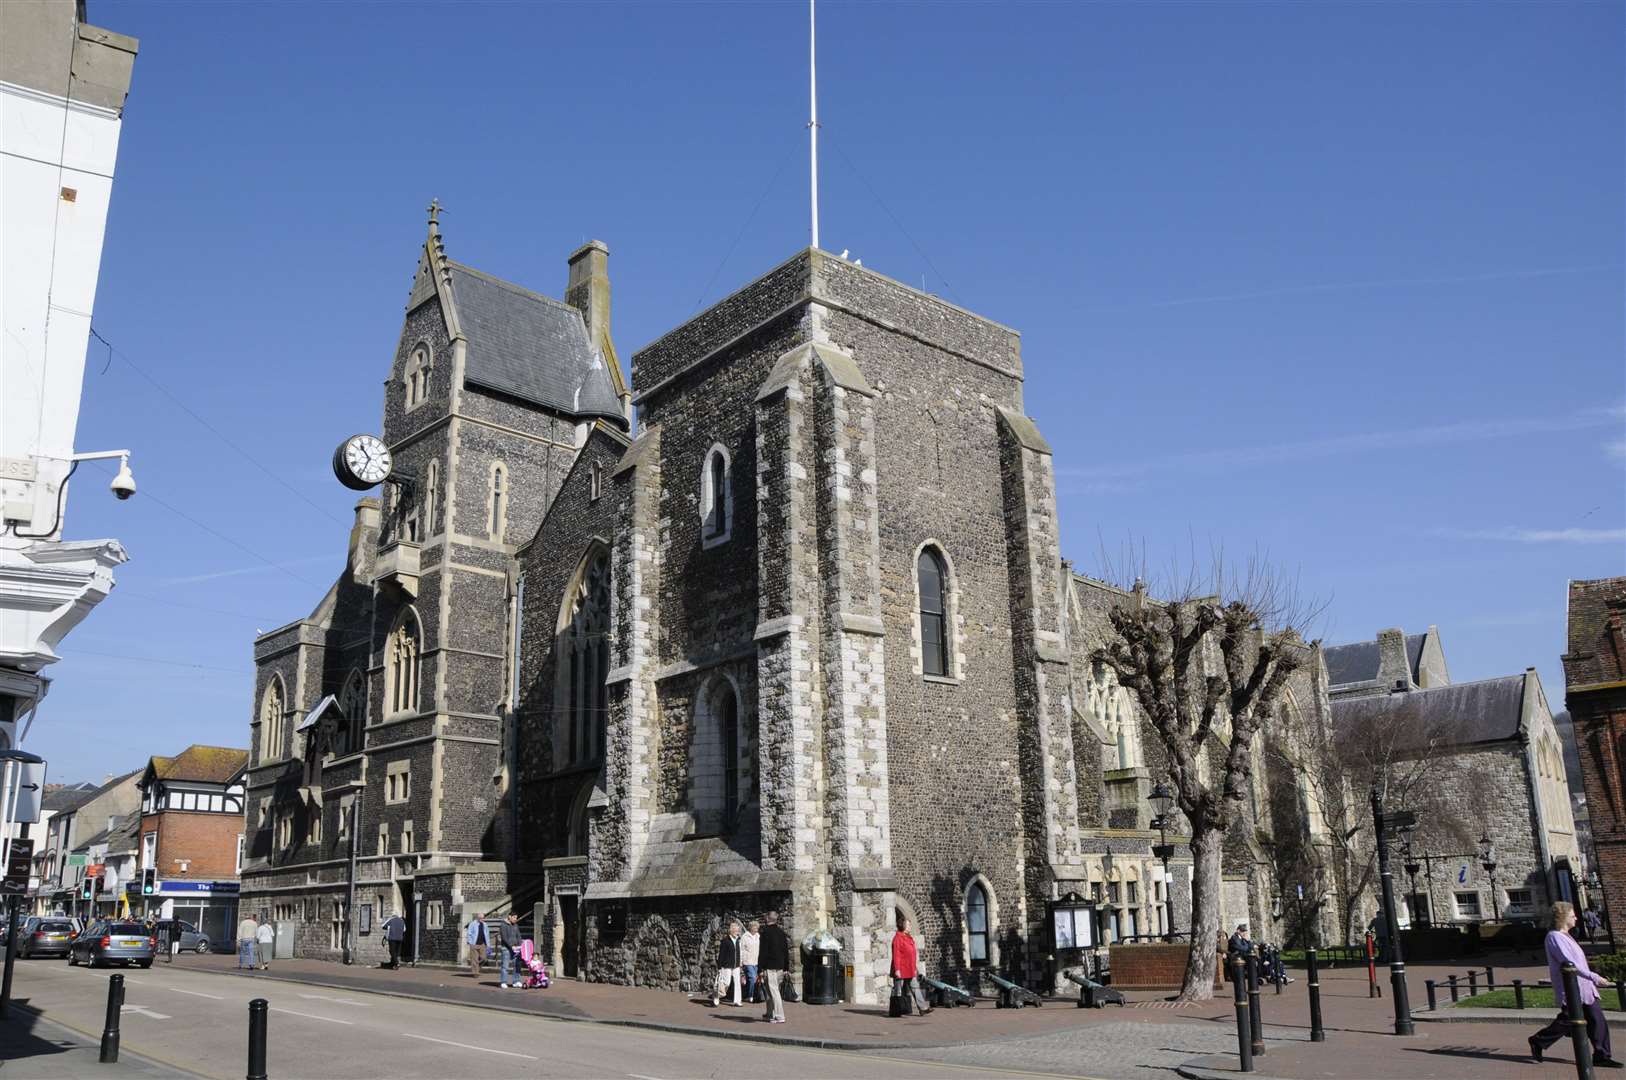 The public are being consulted over the refurbishment of the Town Hall